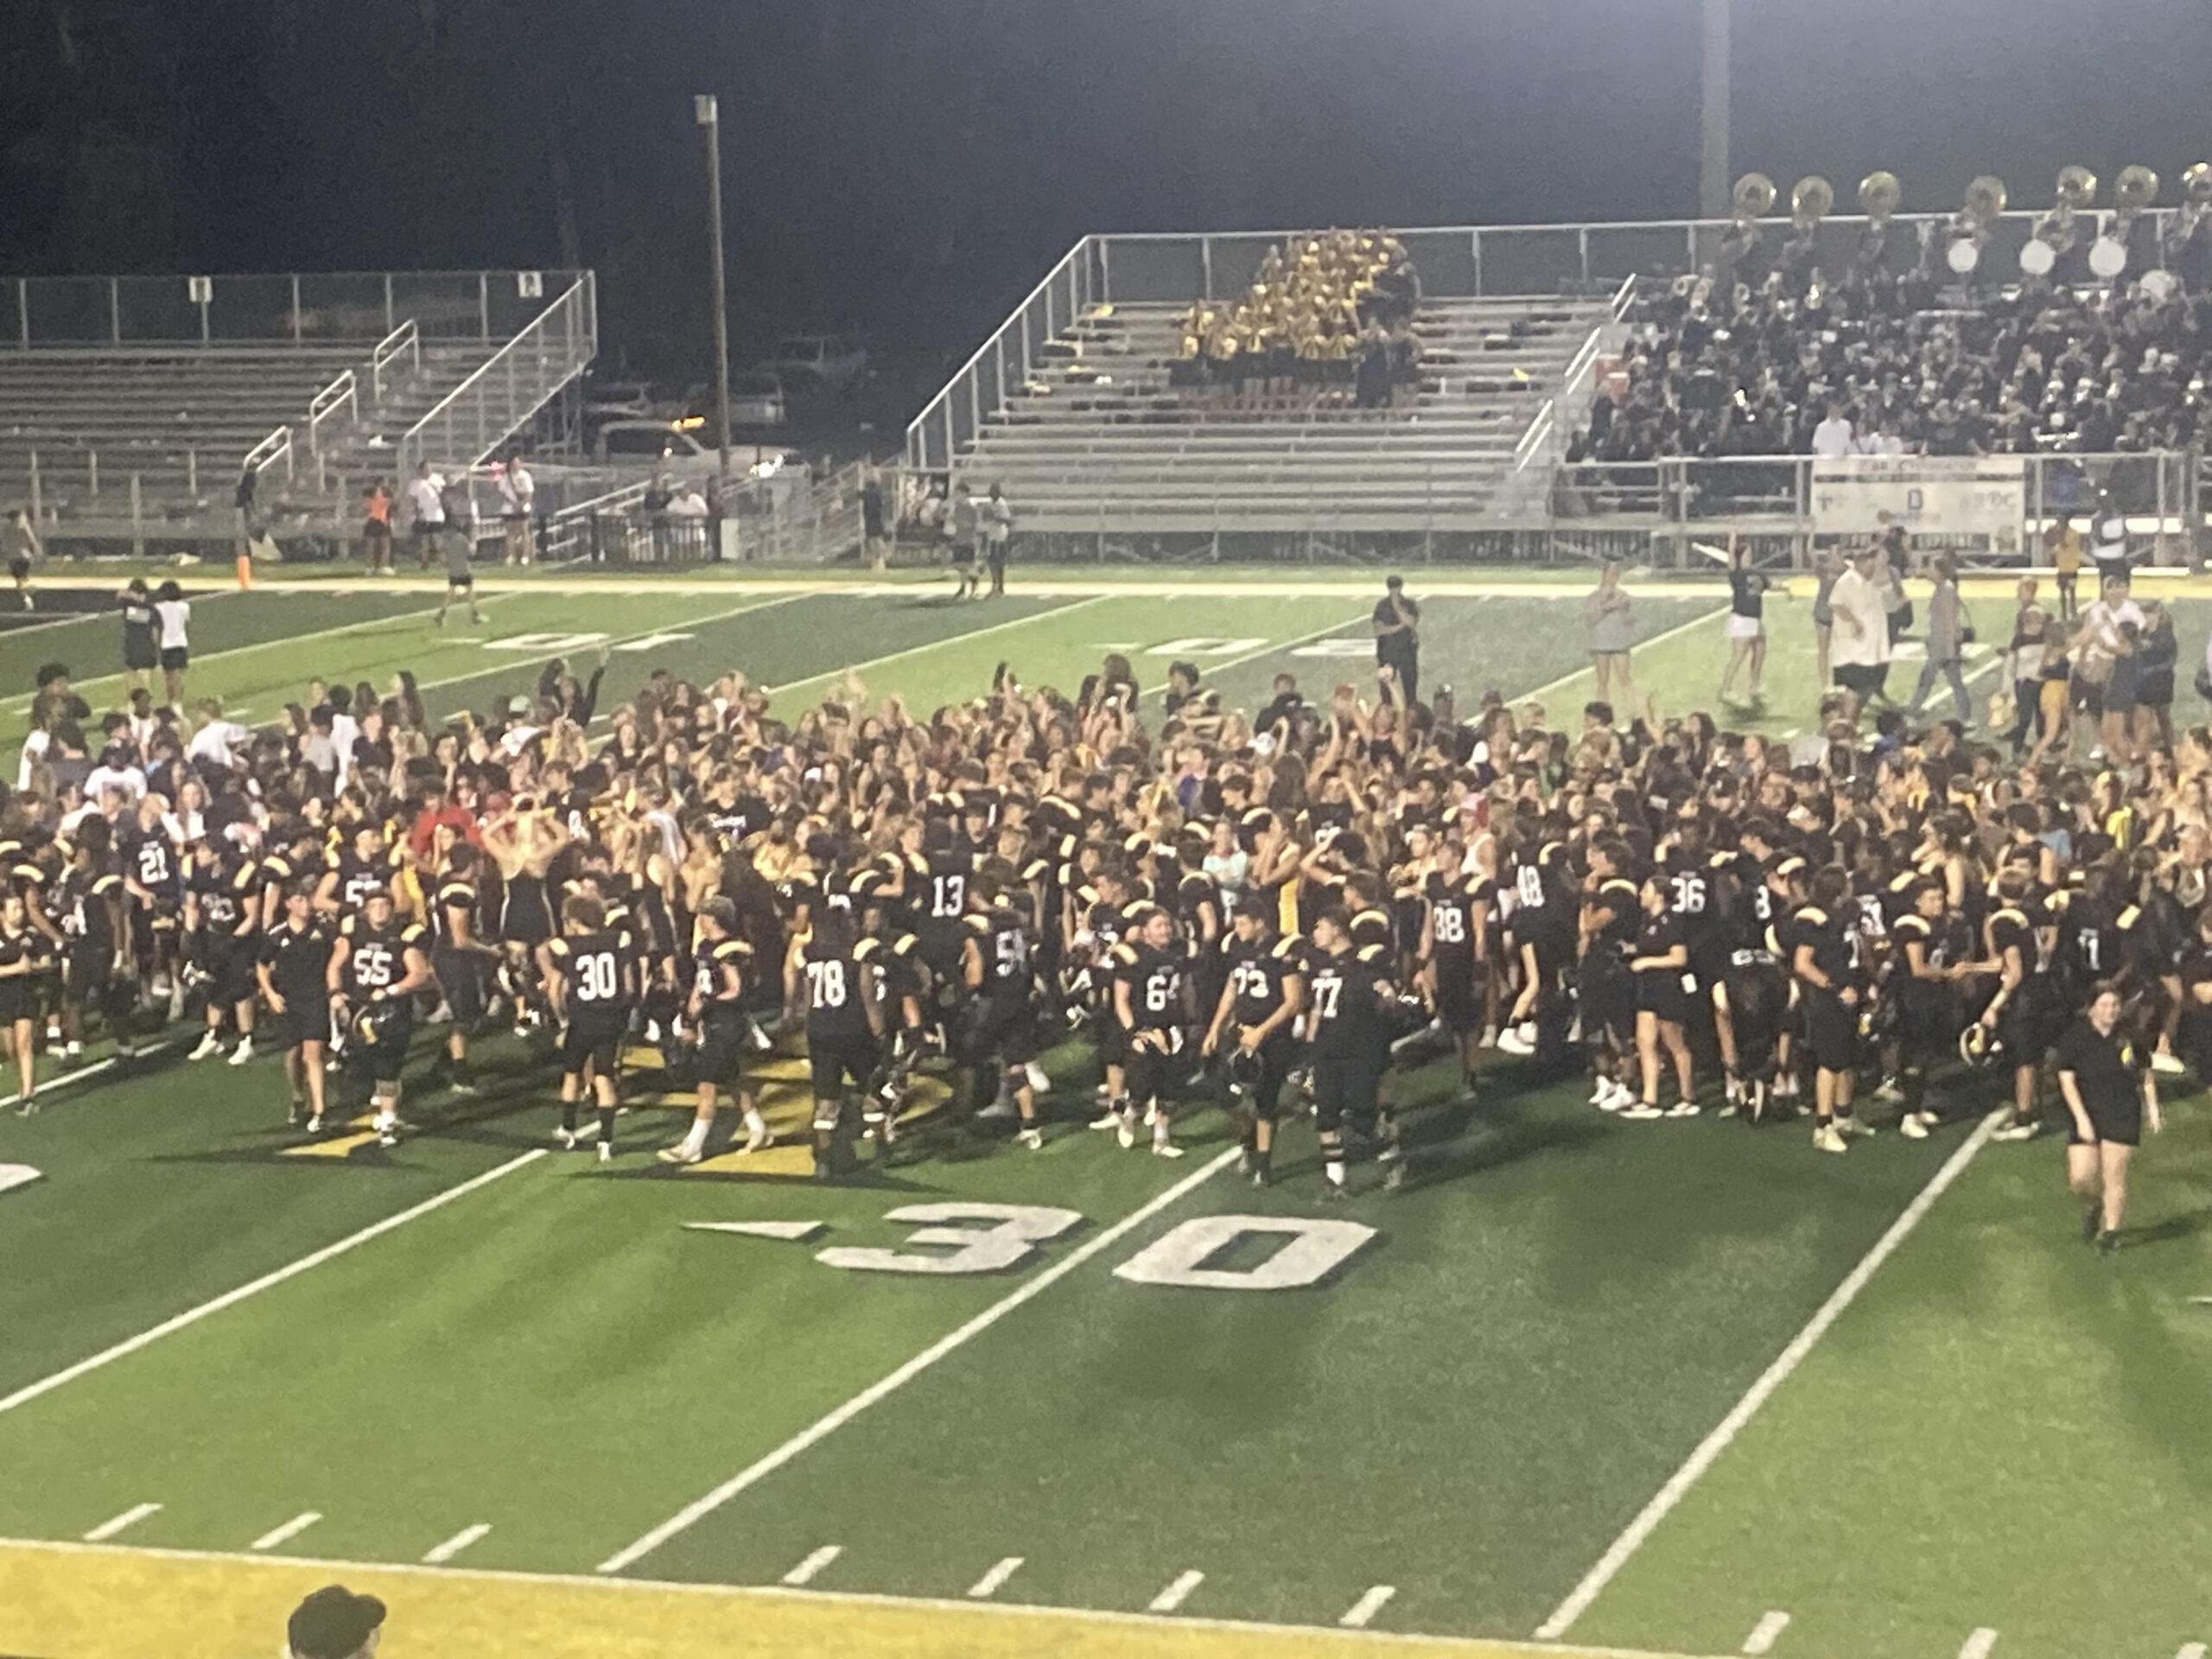 St. Amant shines in 45-20 victory over G.W. Carver